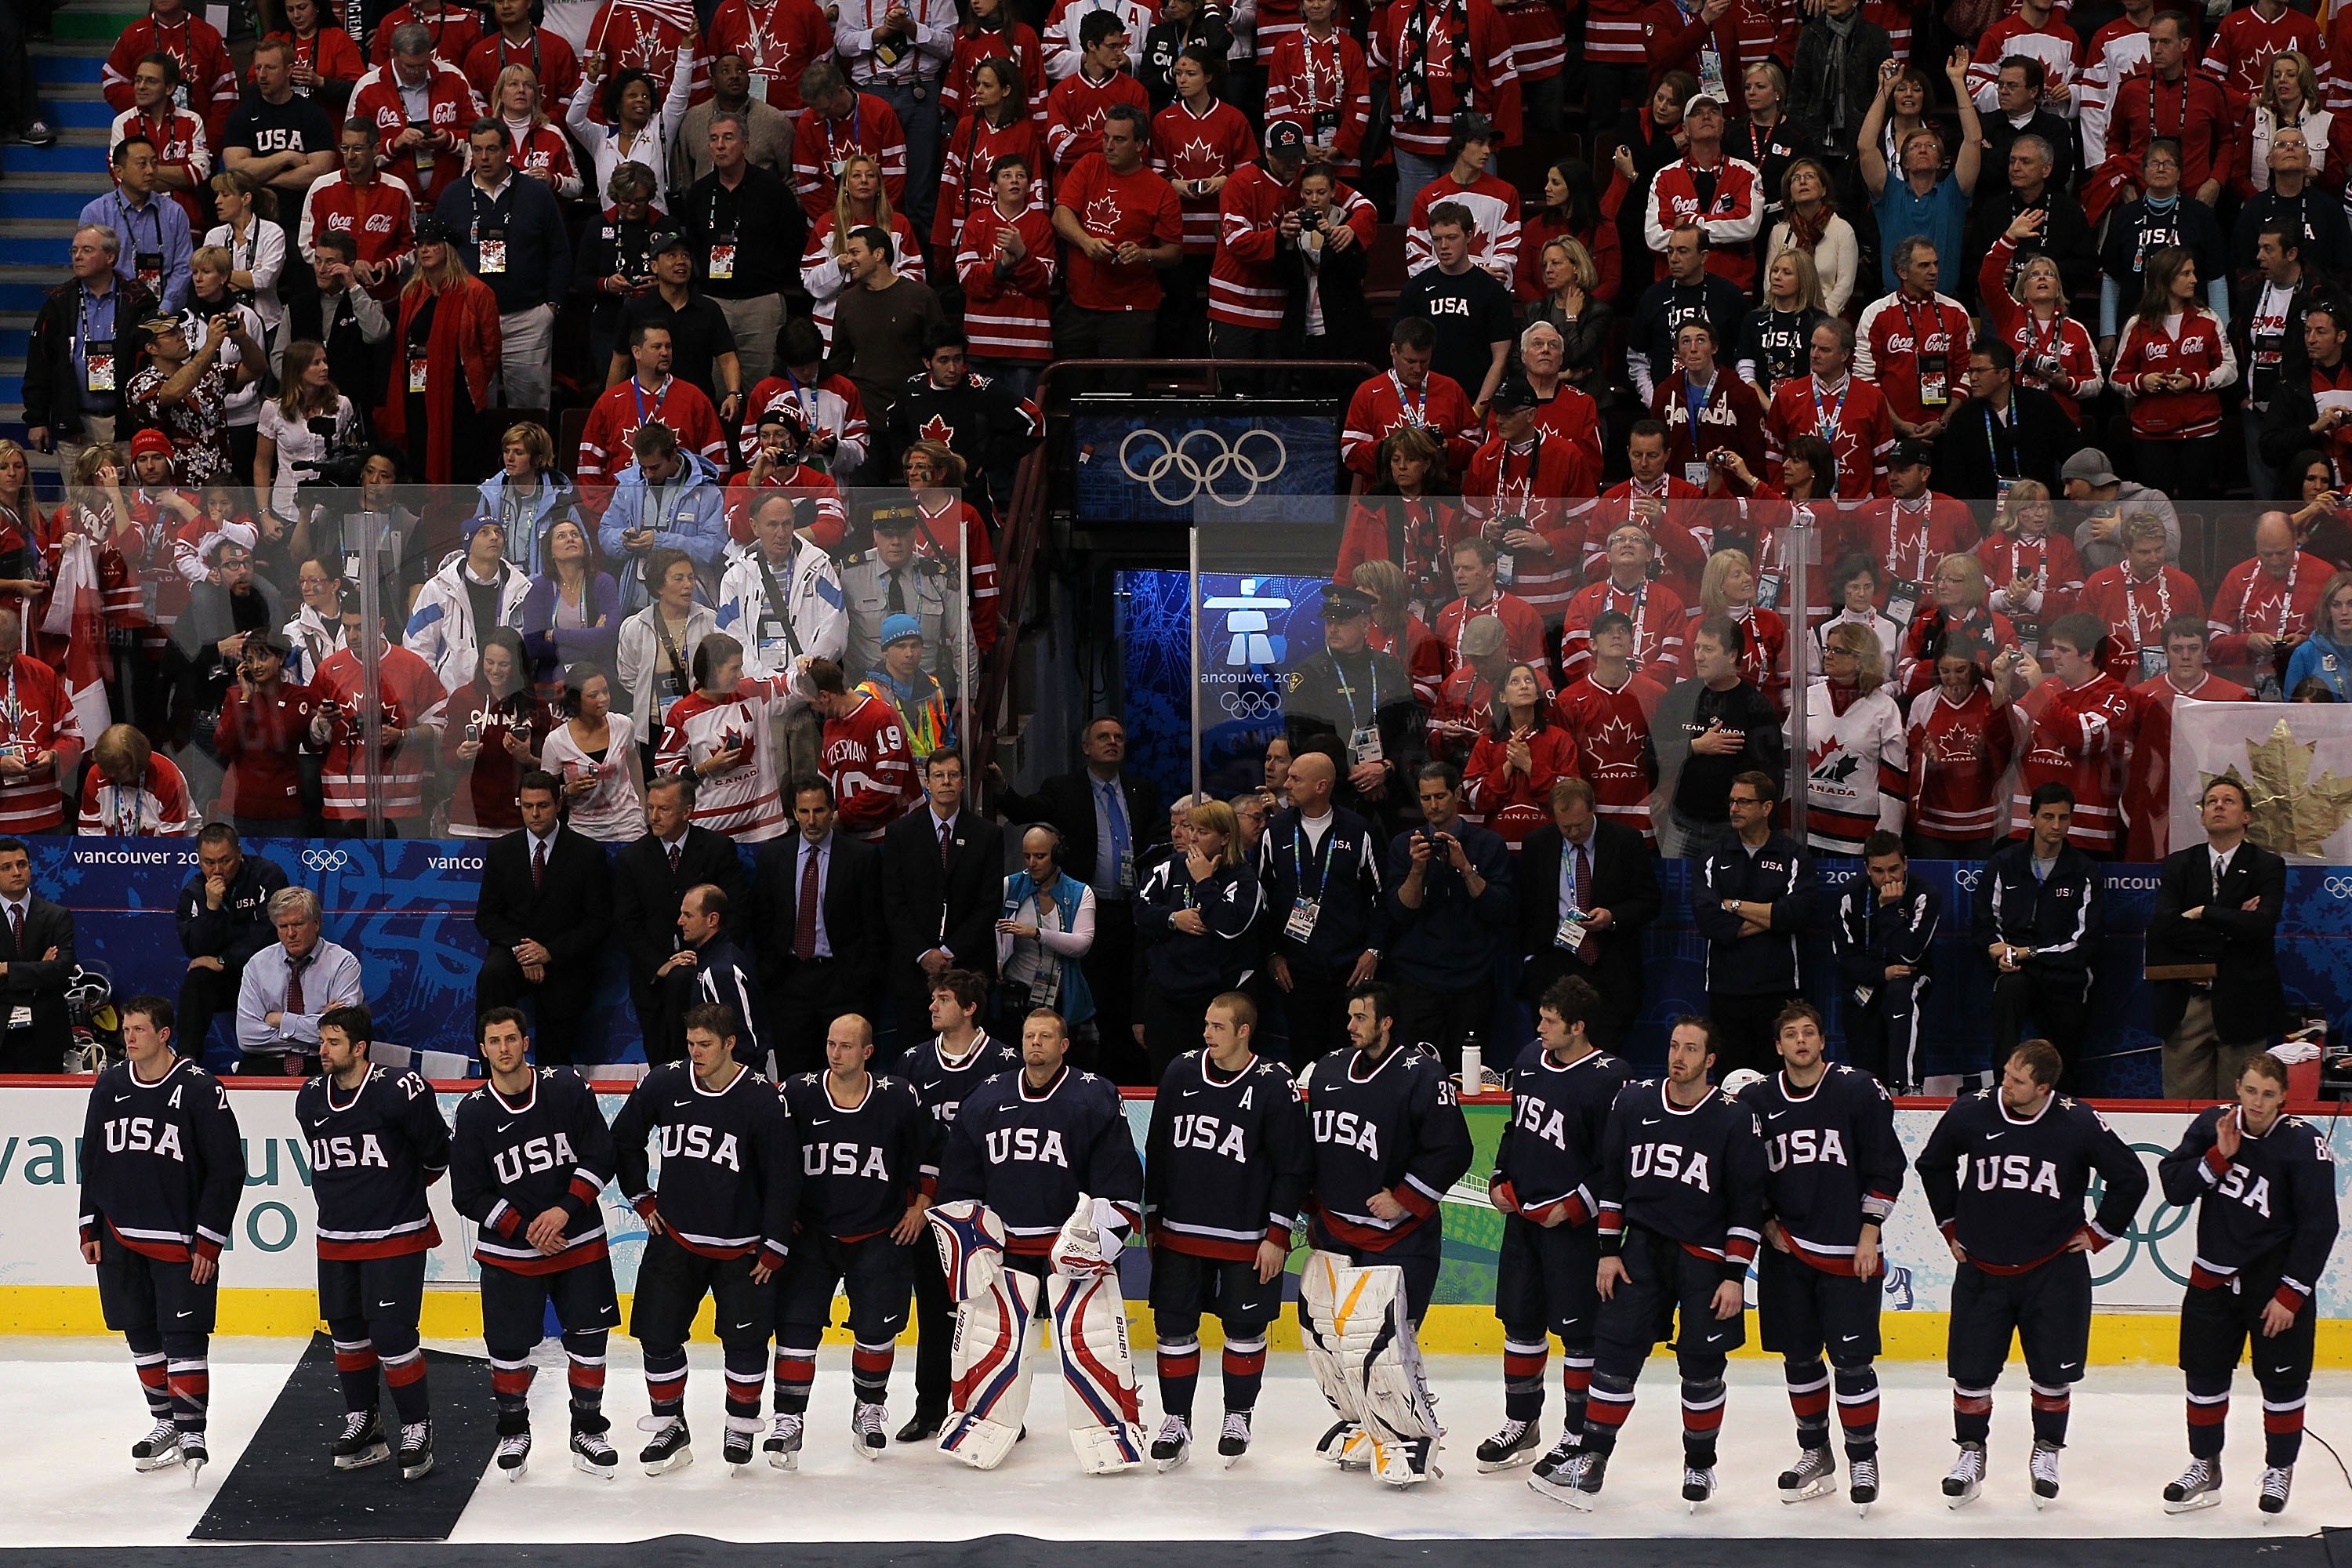 VANCOUVER, BC - FEBRUARY 28:  Dejected Team USA players wait to receive their silver medals following their 3-2 overtime defeat in the ice hockey men's gold medal game between USA and Canada on day 17 of the Vancouver 2010 Winter Olympics at Canada Hockey